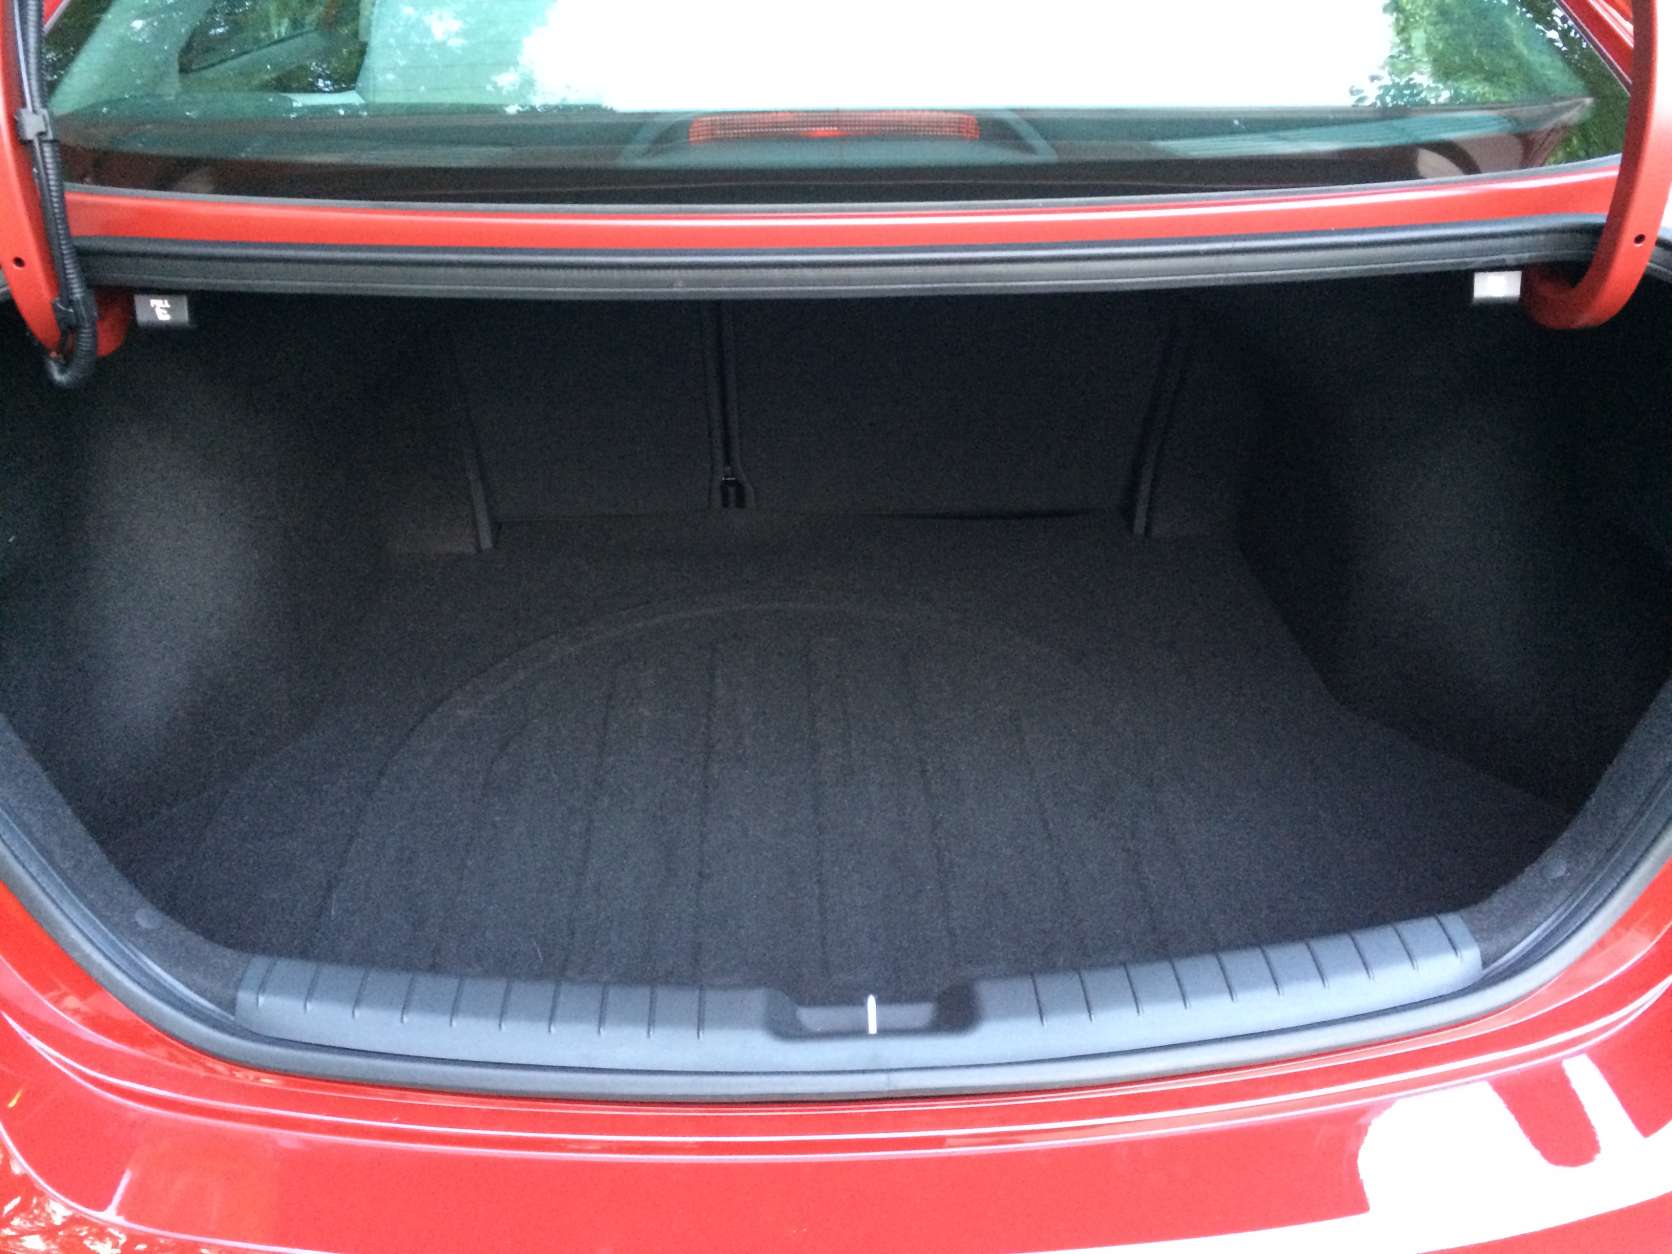 Trunk space in the 2017 Hyundai Elantra is a bit smaller than some of the competition. (WTOP/Mike Parris)